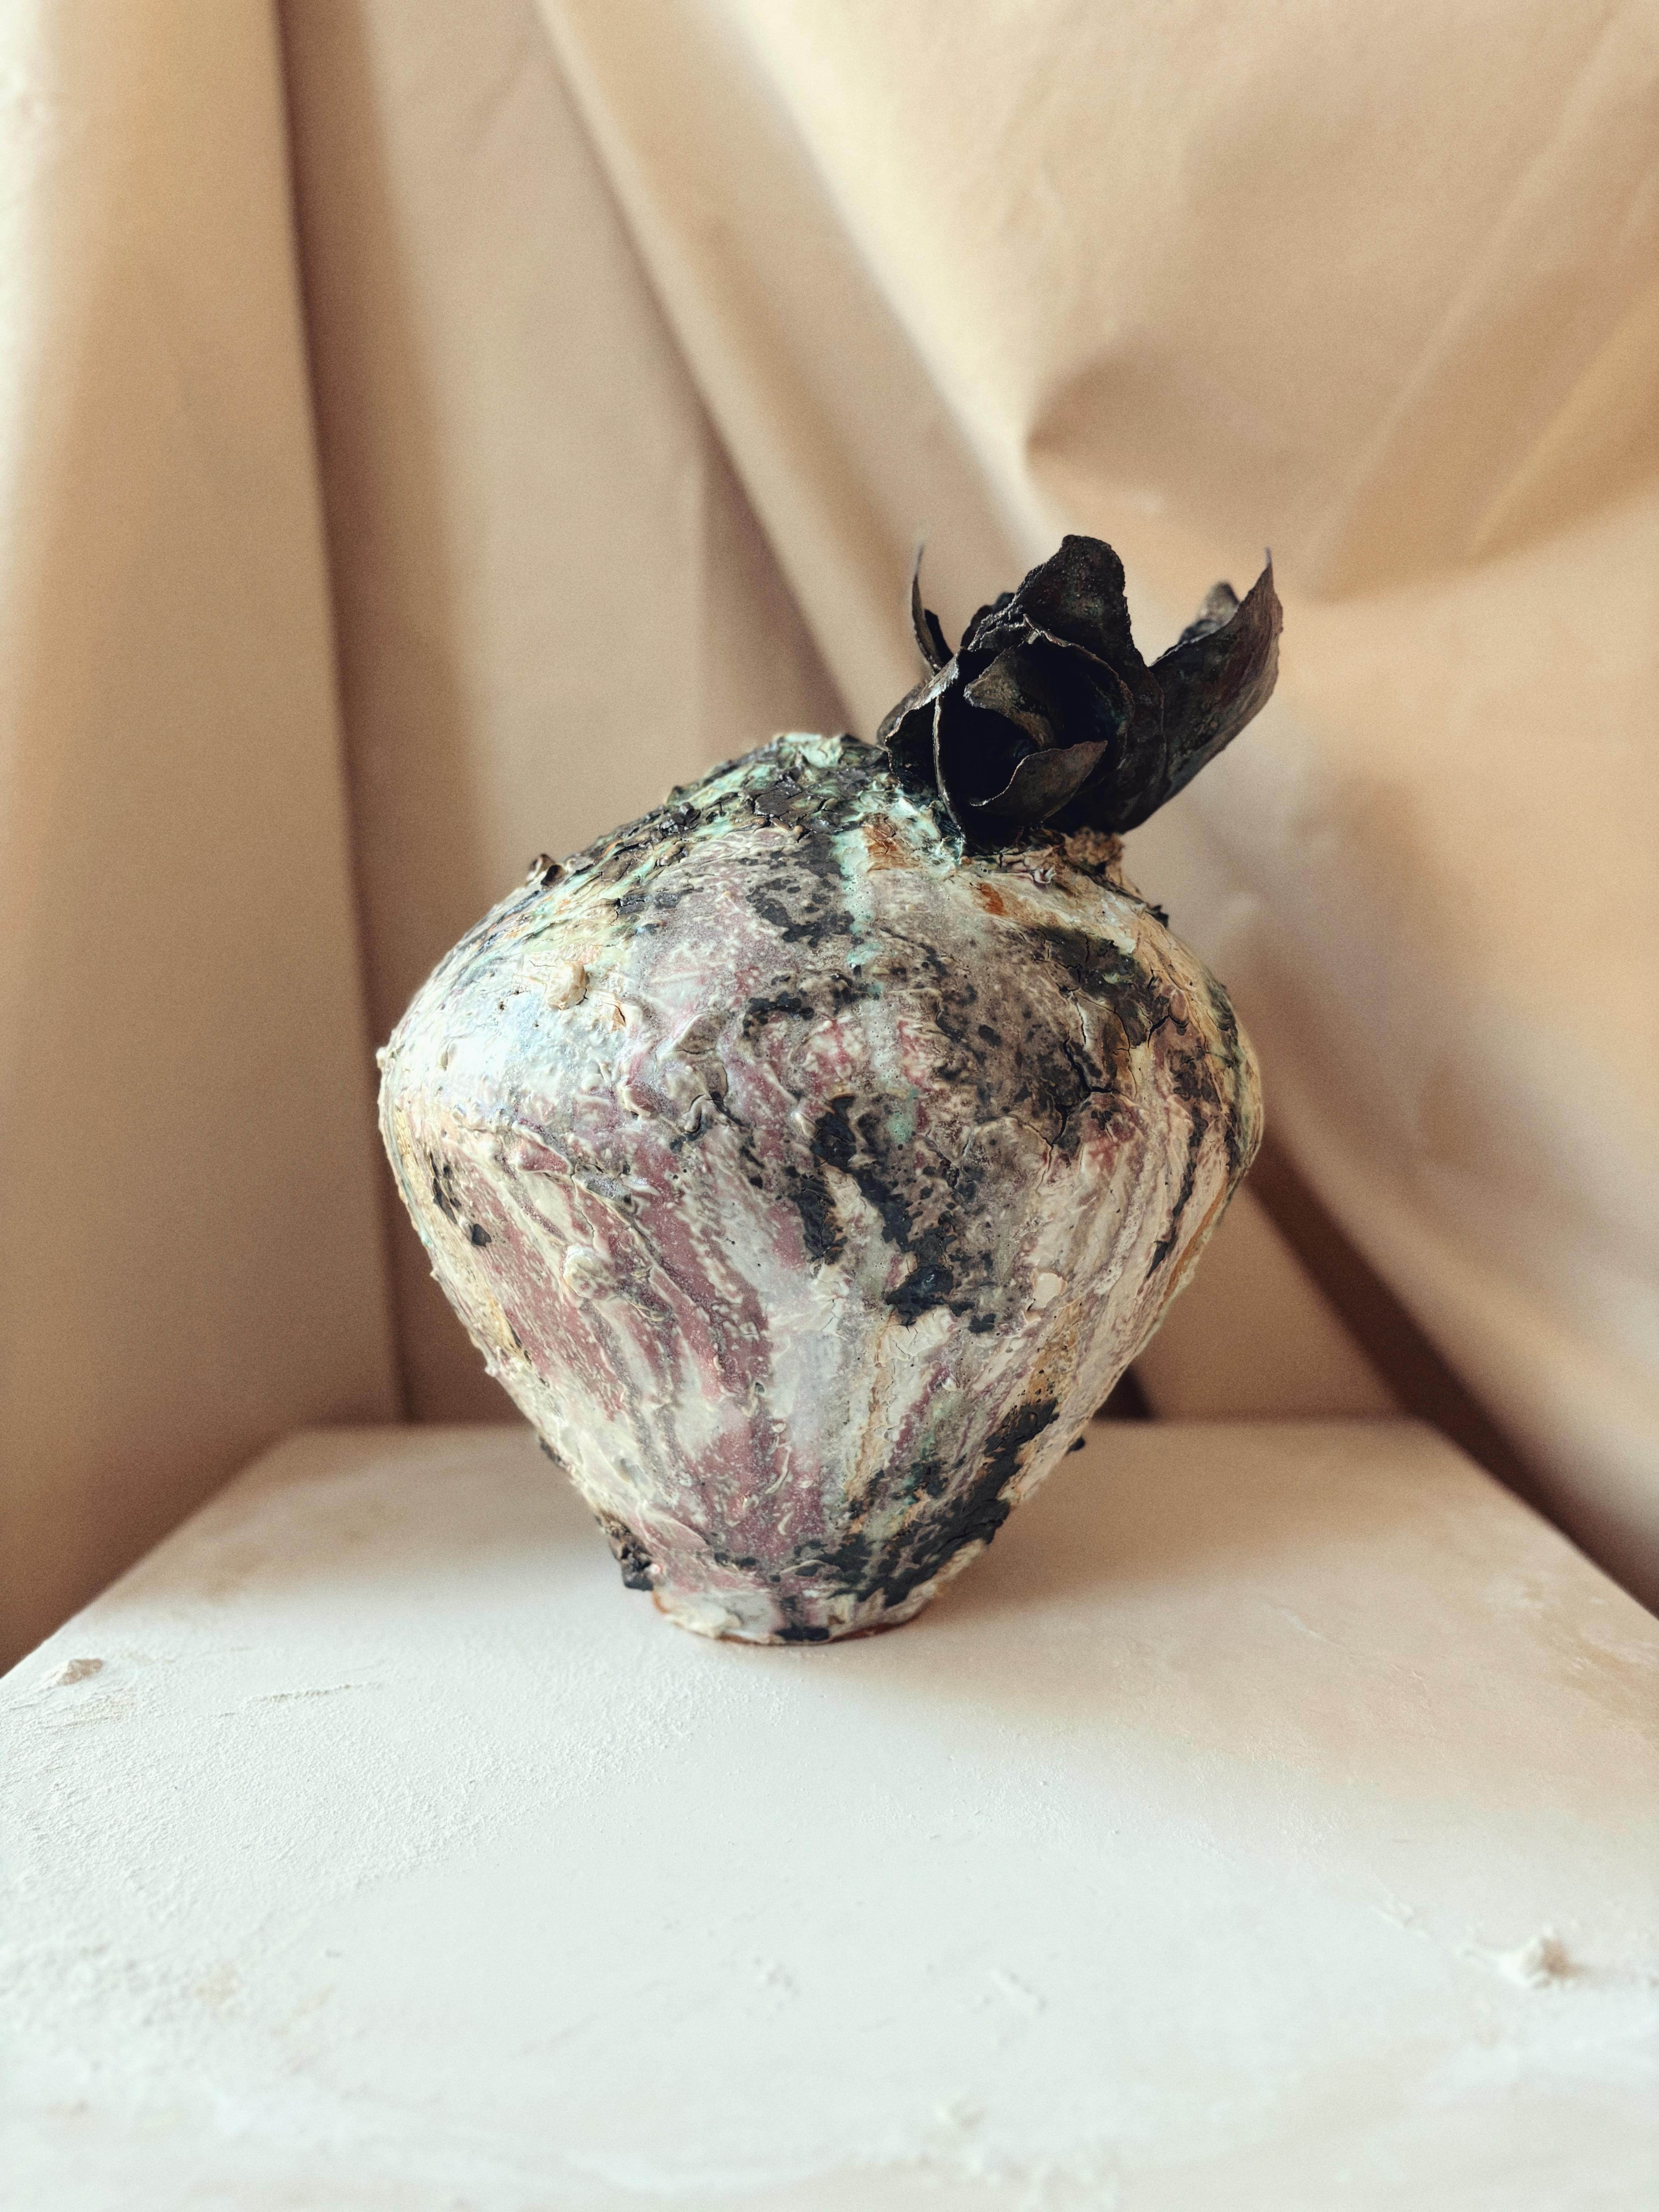 Dear You Ceramics is a Brooklyn based ceramic studio specializing in creating sculptural, functional pieces inspired by nature's bloom.   

This once of a kind vase is handmade in 2023 with sculpture clay and finished with washes and different glaze